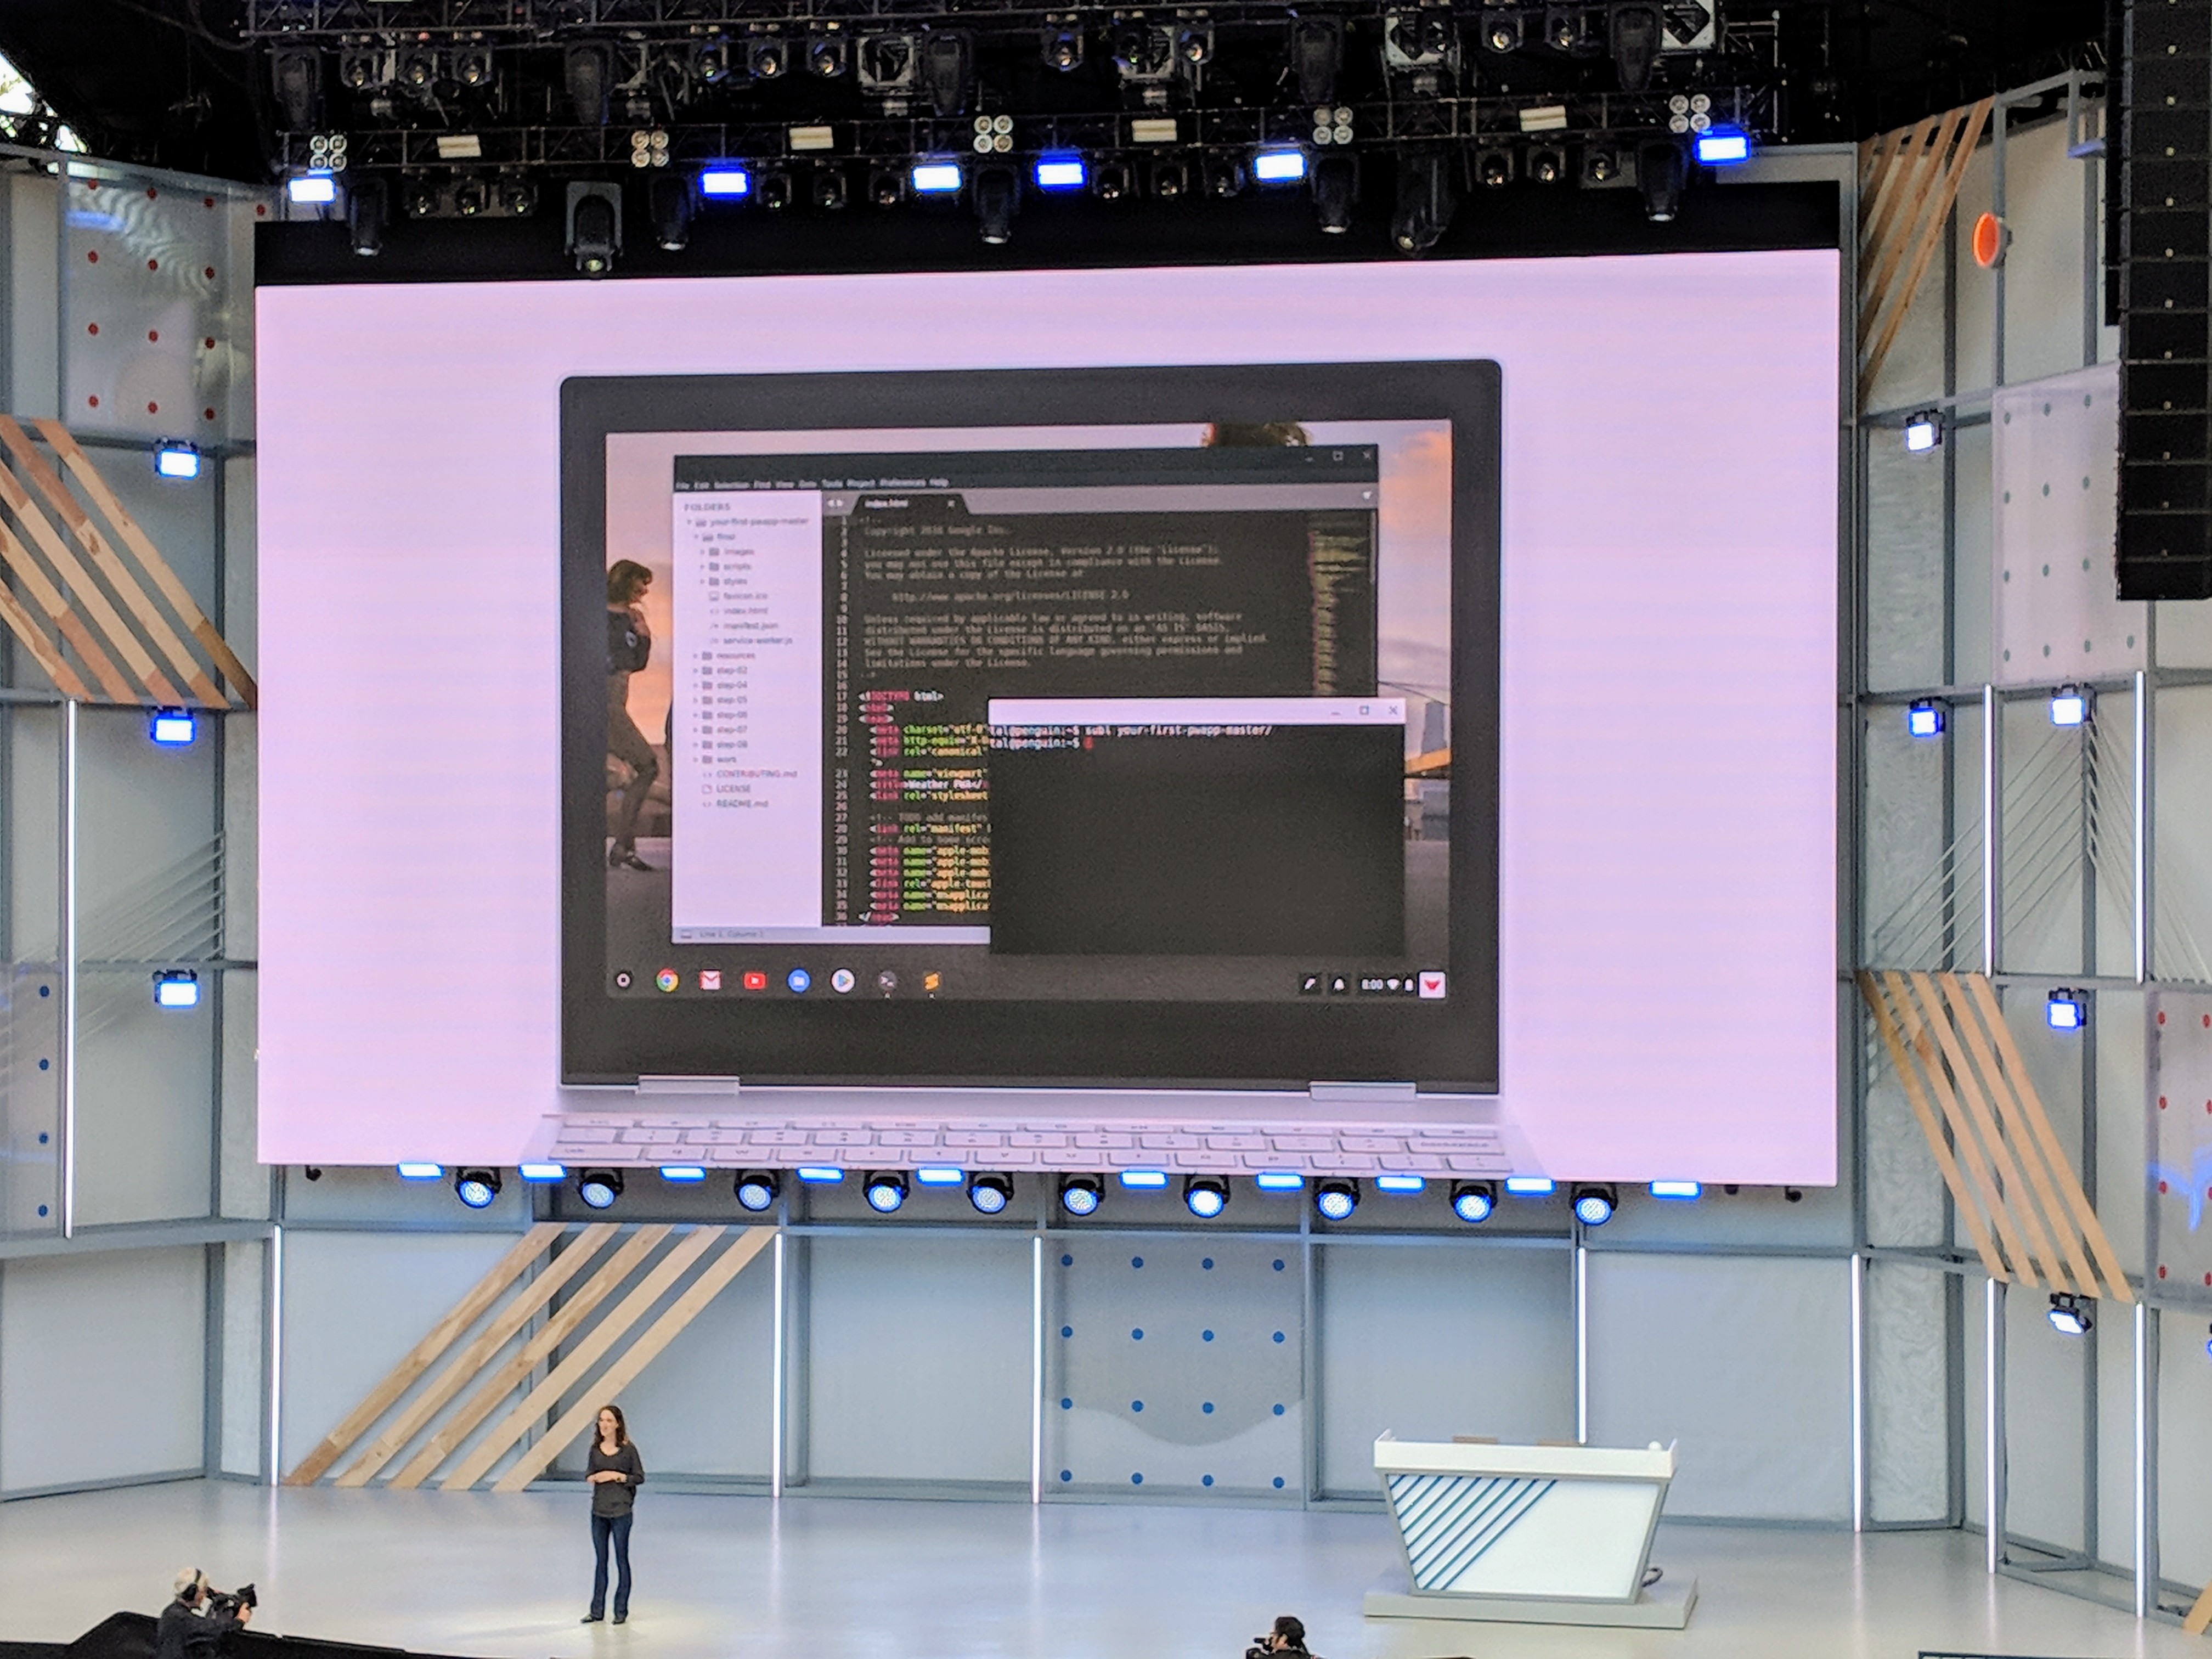 android studio preview not available until successful build